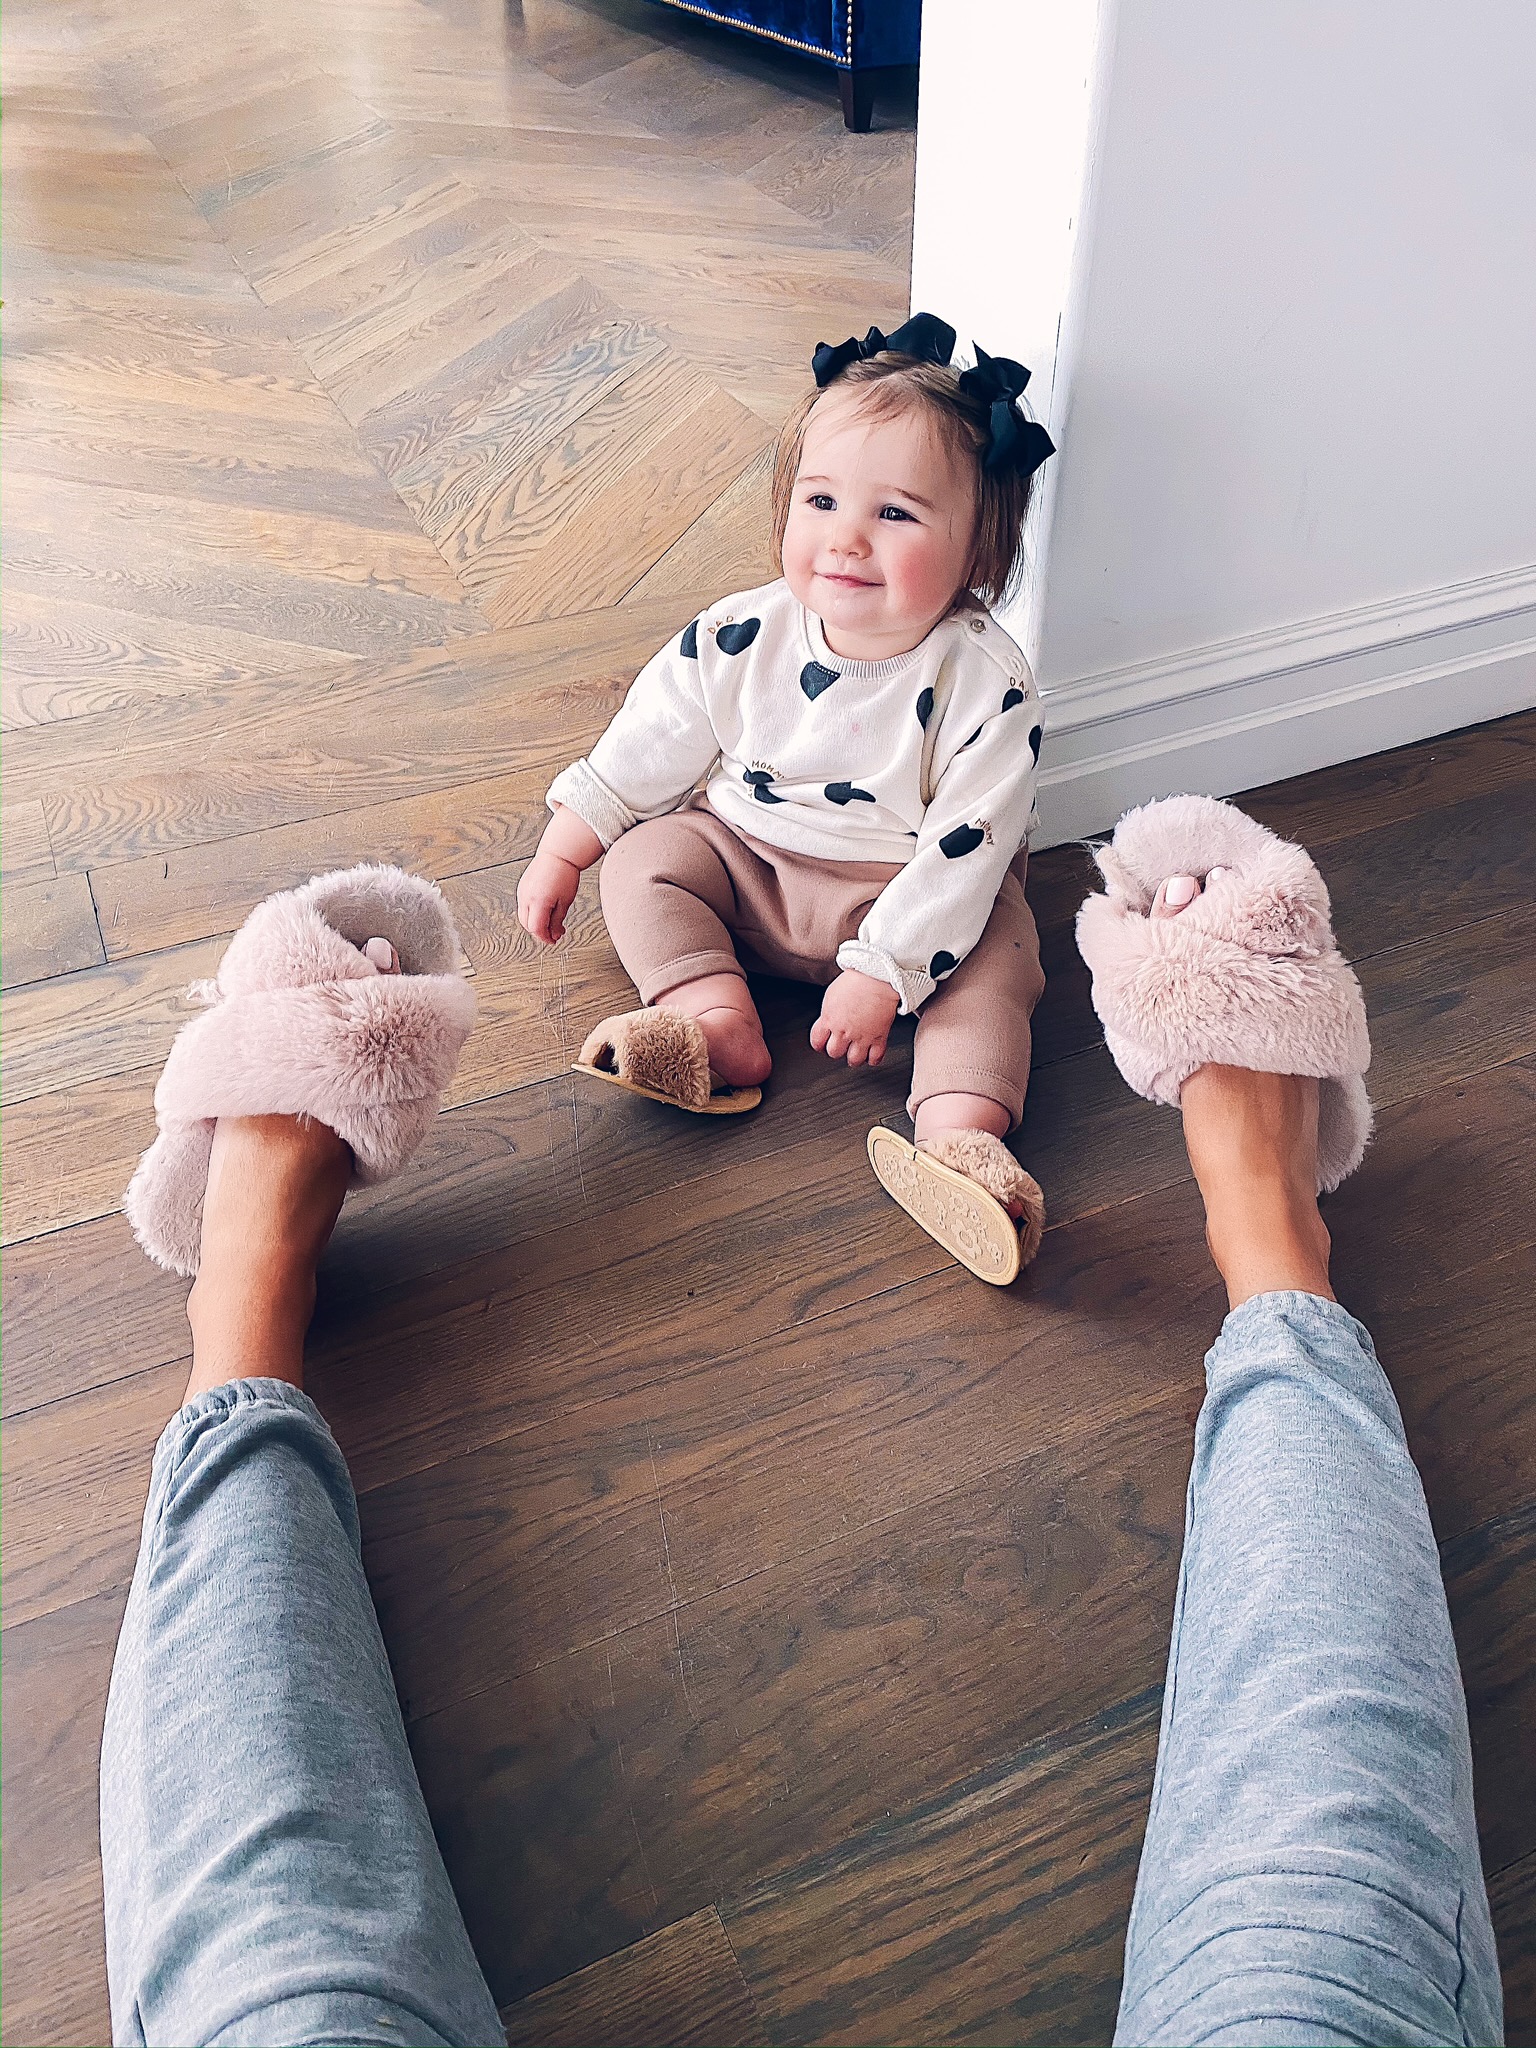 Instagram Recap by popular US lifestyle blog, The Sweetest Thing: image of a mom and daughter sitting on the floor and wearing a Nordstrom Moto Cozy Jogger Pants CHASER, Amazon HALLUCI Women's Cross Band Soft Plush Fleece House Indoor or Outdoor Slippers, Amazon KoroBeauty Hair Bow, and Amazon BLKCERY Baby Sandals for Girls Summer Shoes Faux Fur Slippers.